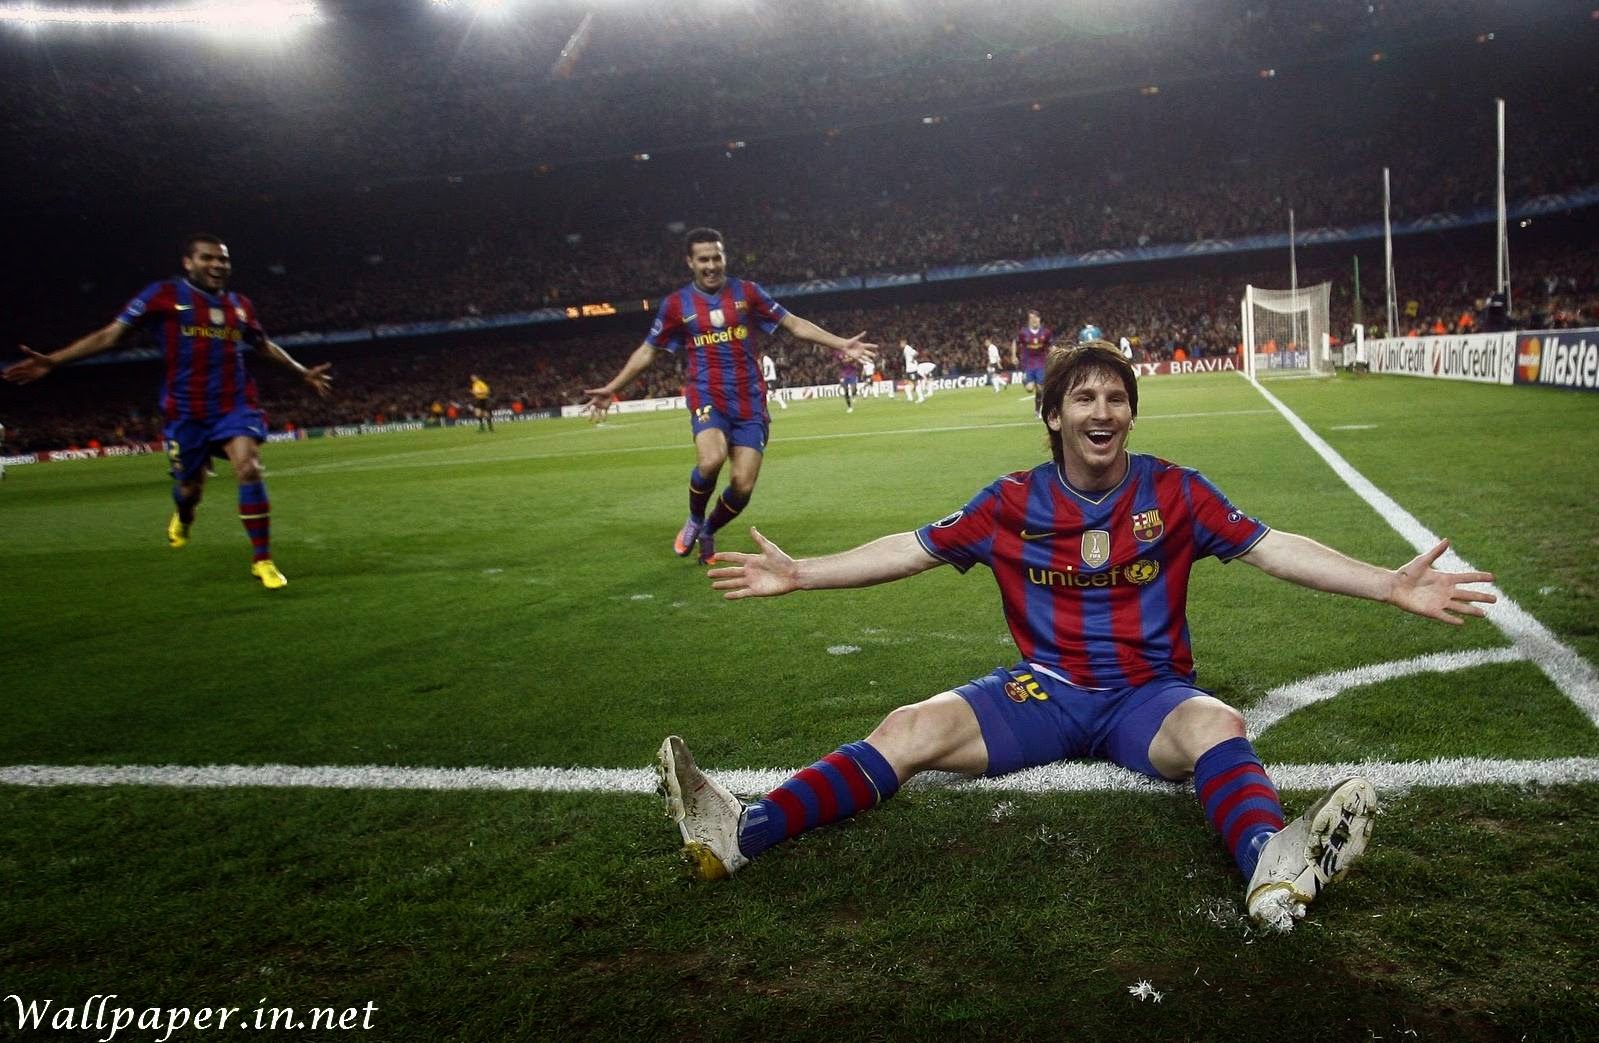  Club 2014 Lionel Messi Goal Celebration HD Wallpapers Download 1599x1043